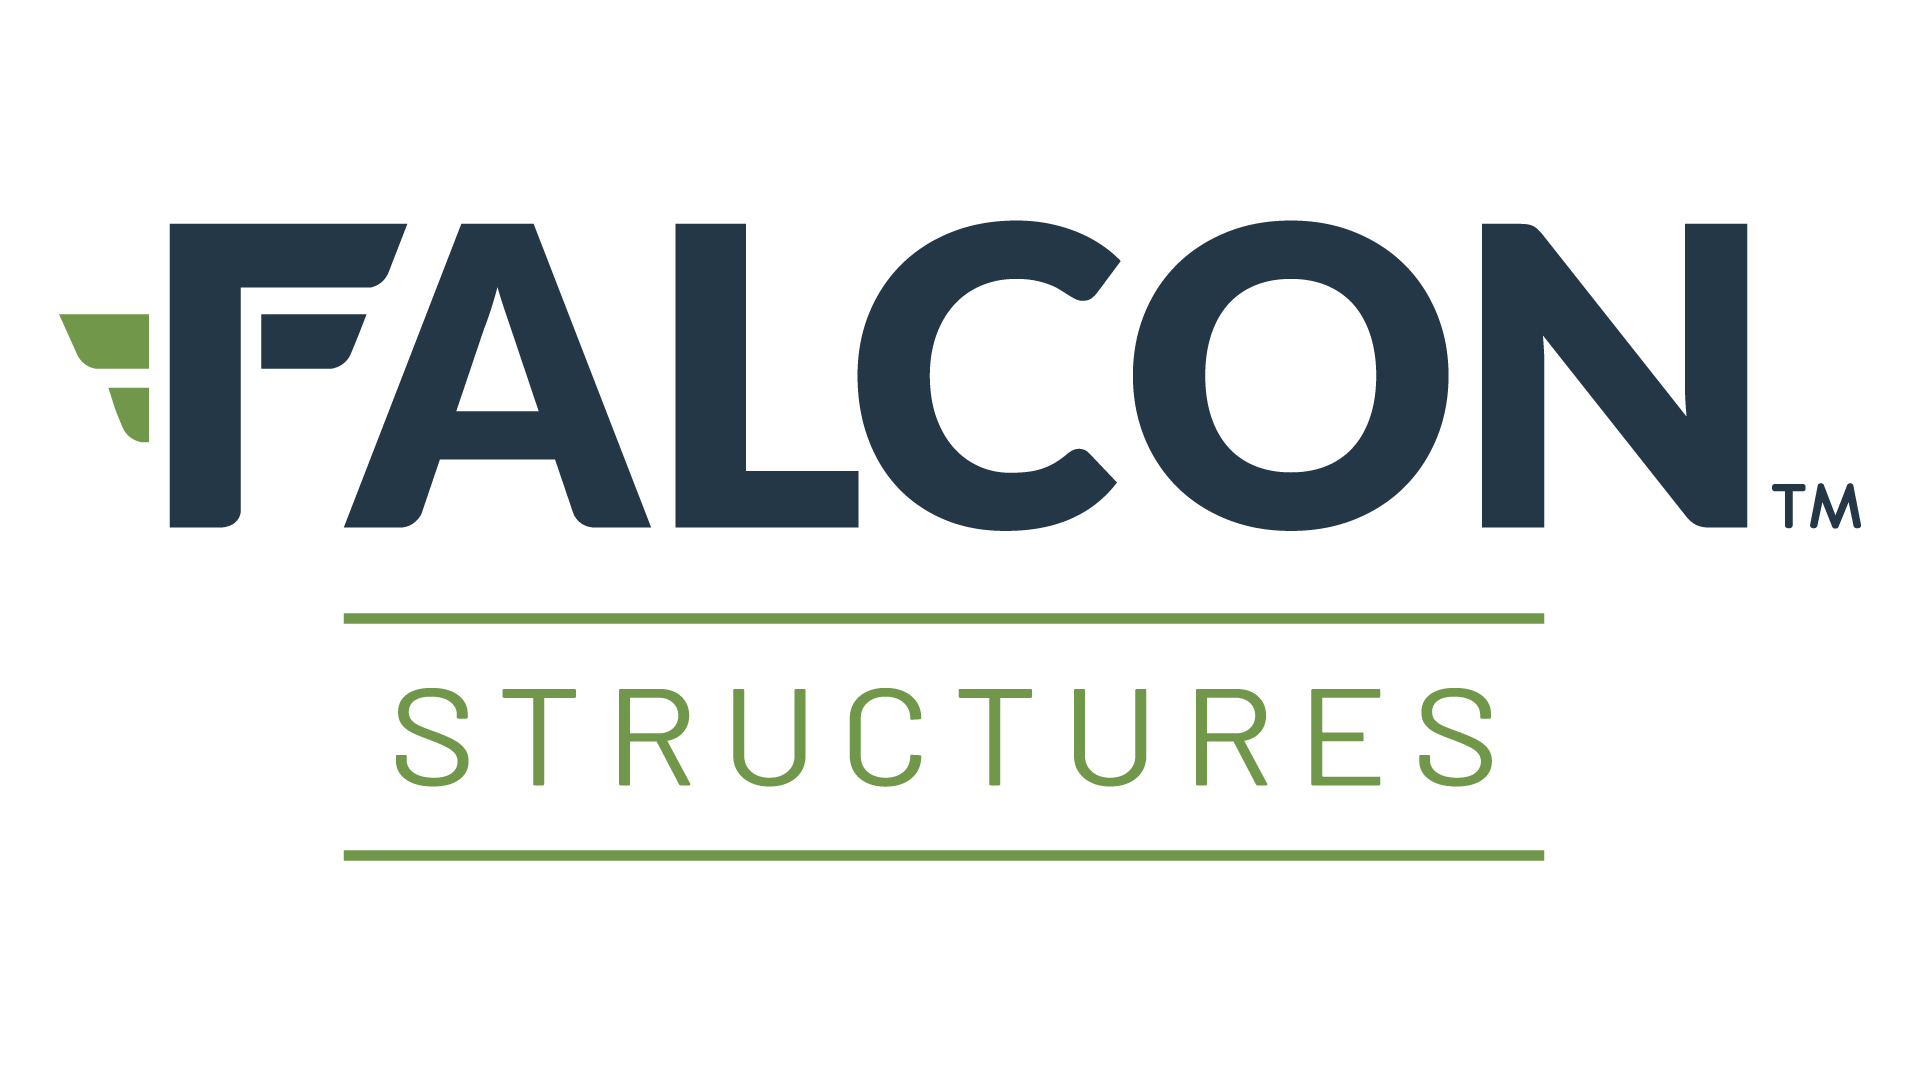 Falcon Structures is a proud sponsor of MBI's Modular Advocacy Program